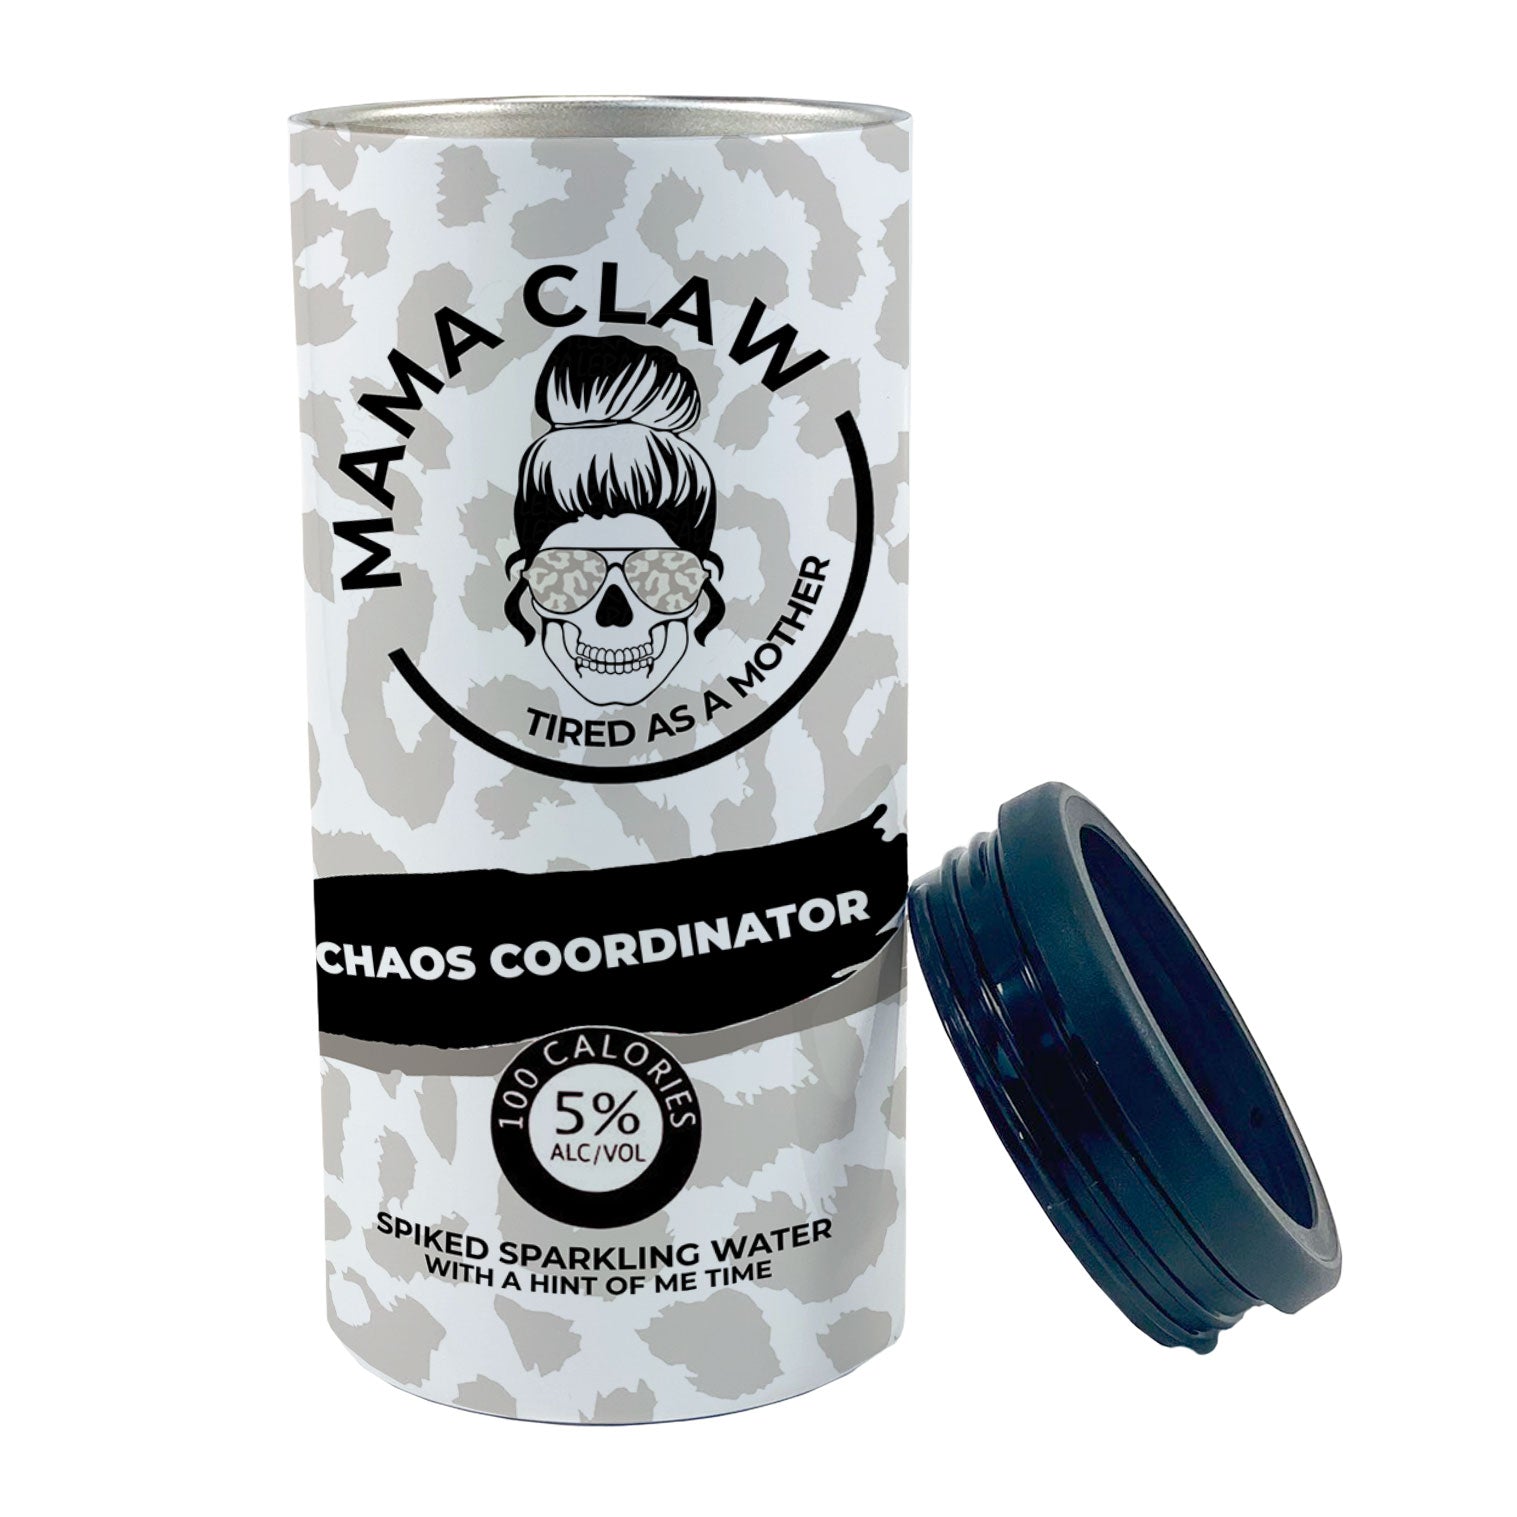 Parent Collection (Mama Claw) 12 Oz Stainless Steel Slim Can Cooler